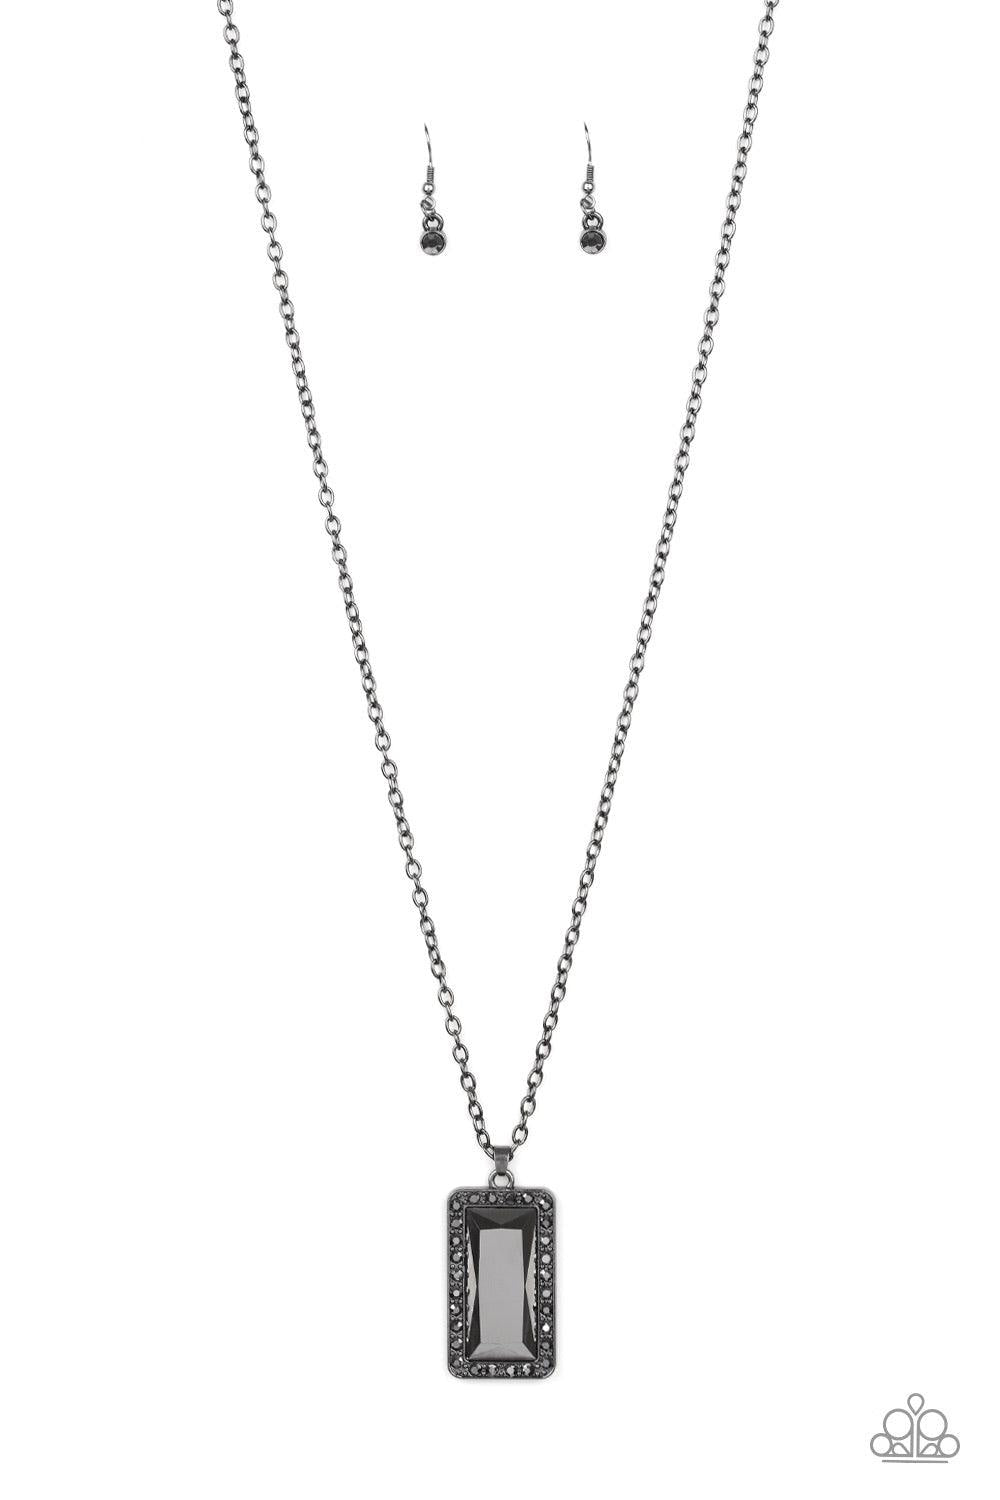 Paparazzi Accessories Bada BLING Bada Boom - Black Featuring a regal emerald style cut, a faceted hematite rhinestone is pressed into the center of a glistening gunmetal frame bordered by dainty hematite rhinestones. The dramatic pendant swings from the b